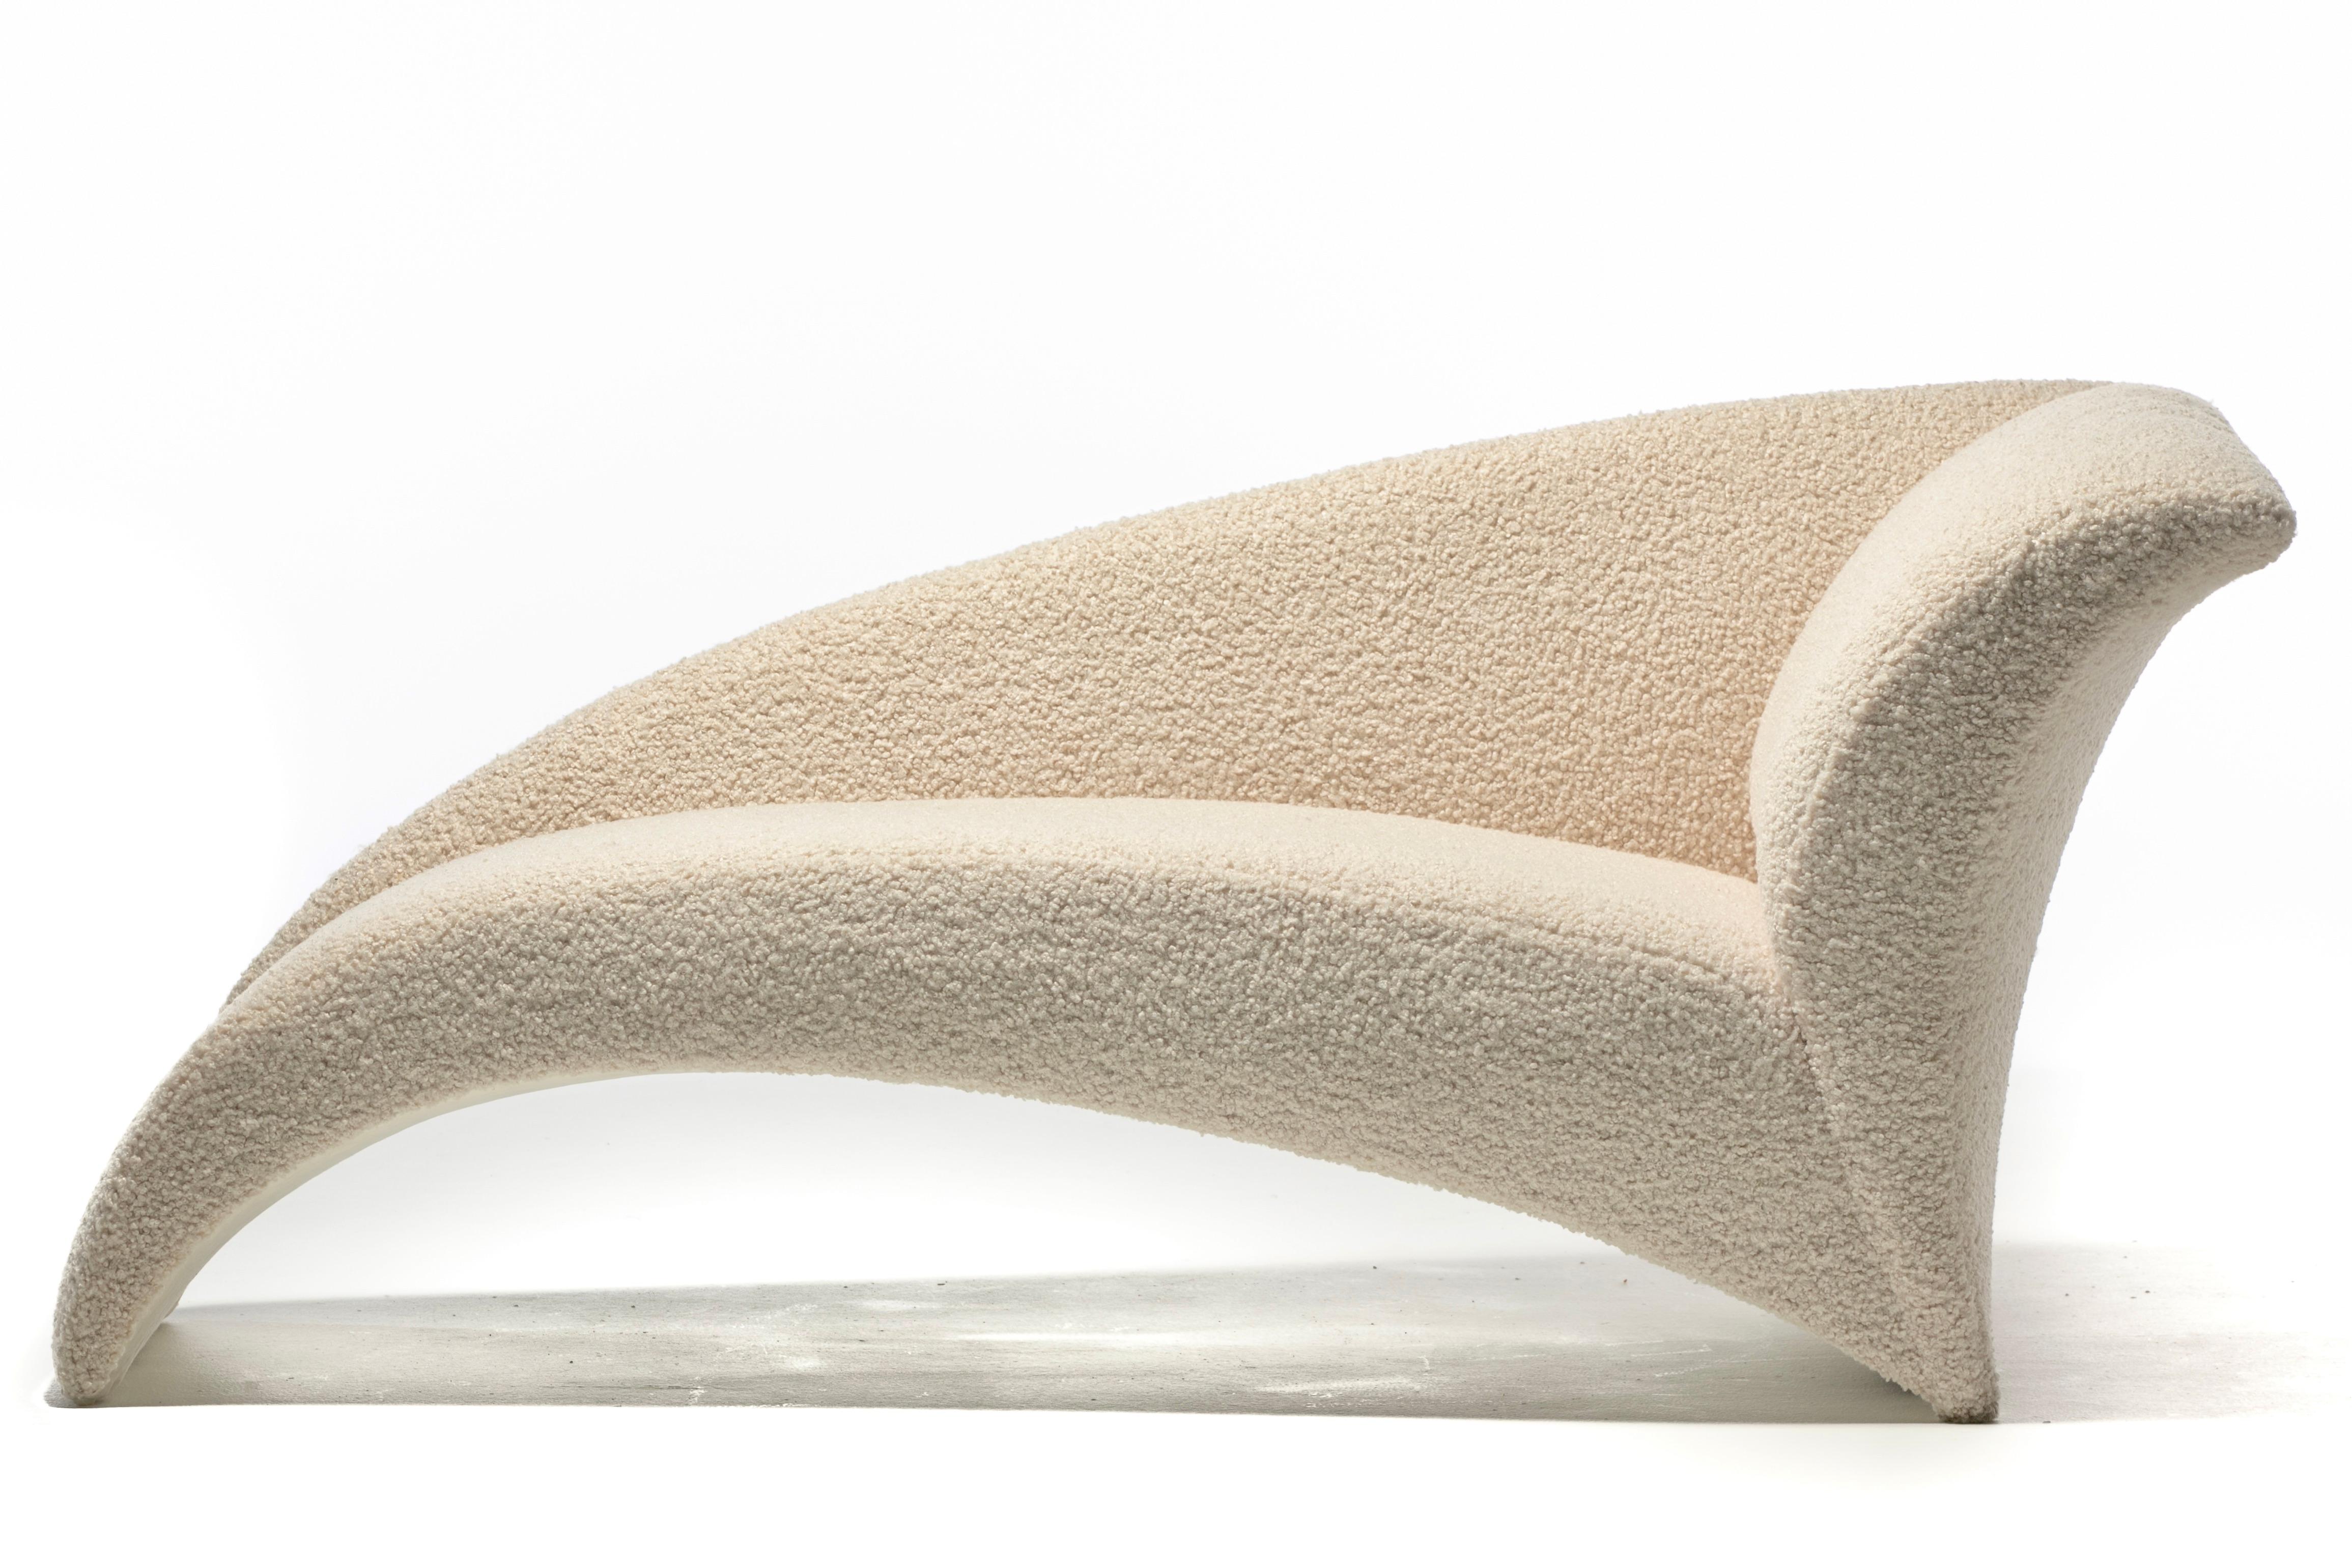 Vladimir Kagan Post Modern Marilyn Chaise Lounge in Ivory White Bouclé c. 1986 For Sale 9